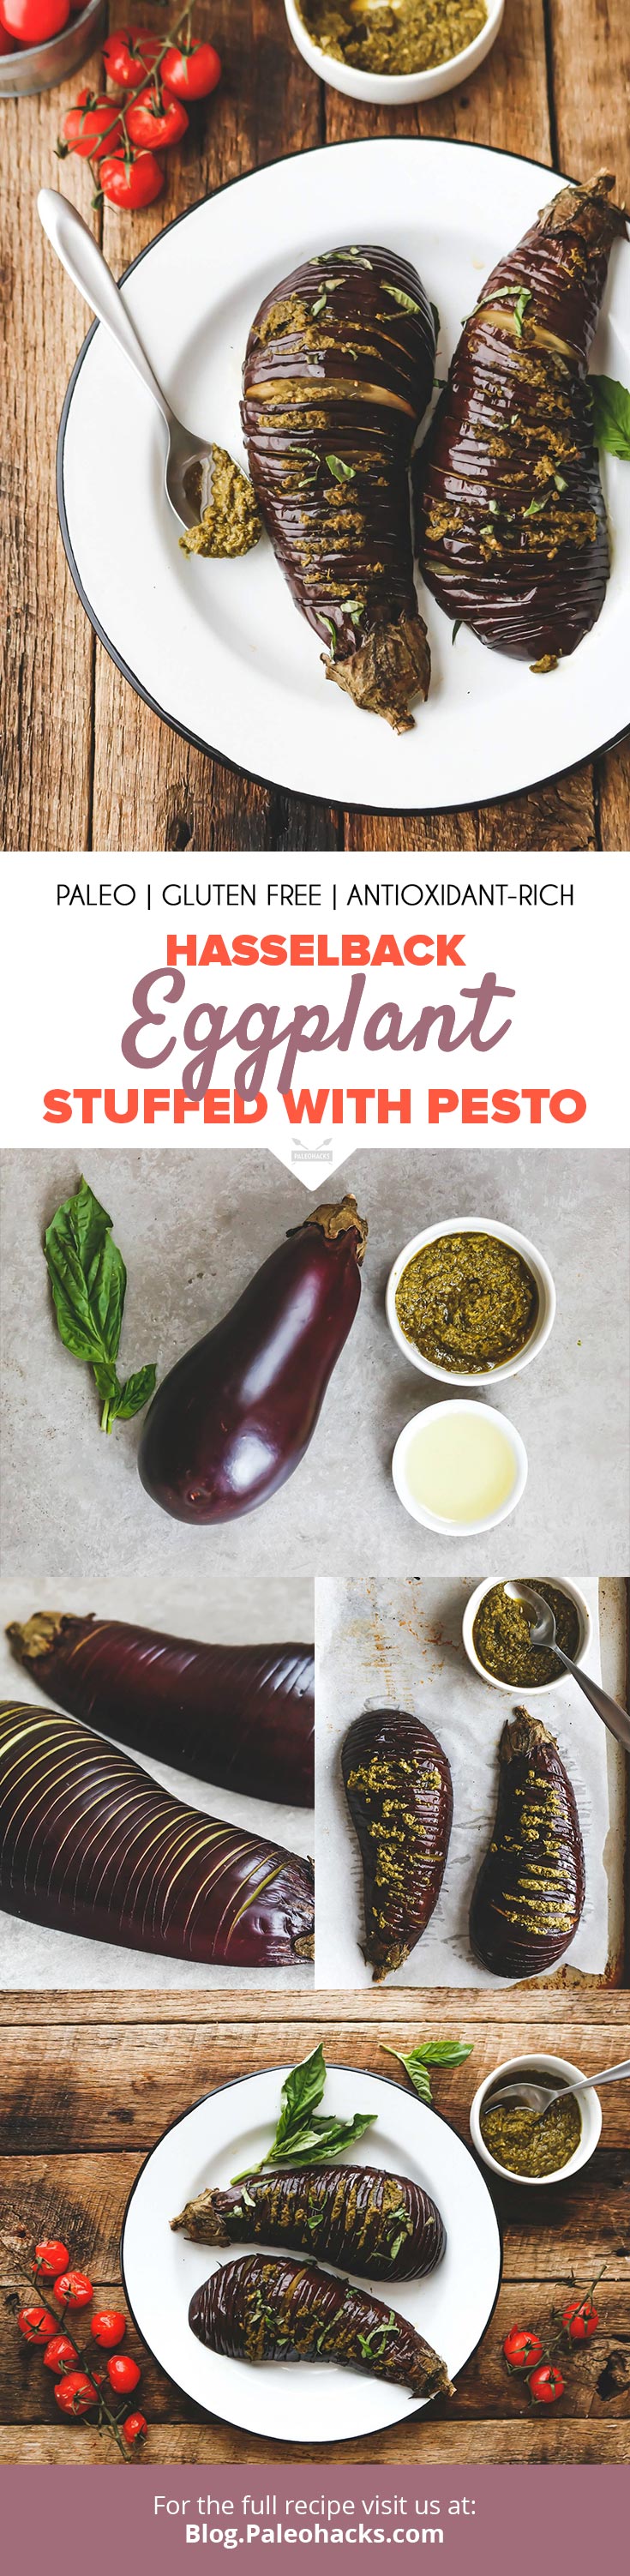 Thinly sliced eggplant gets stuffed with antioxidant-rich pesto and baked for a tender side dish full of fresh Mediterranean flavors.